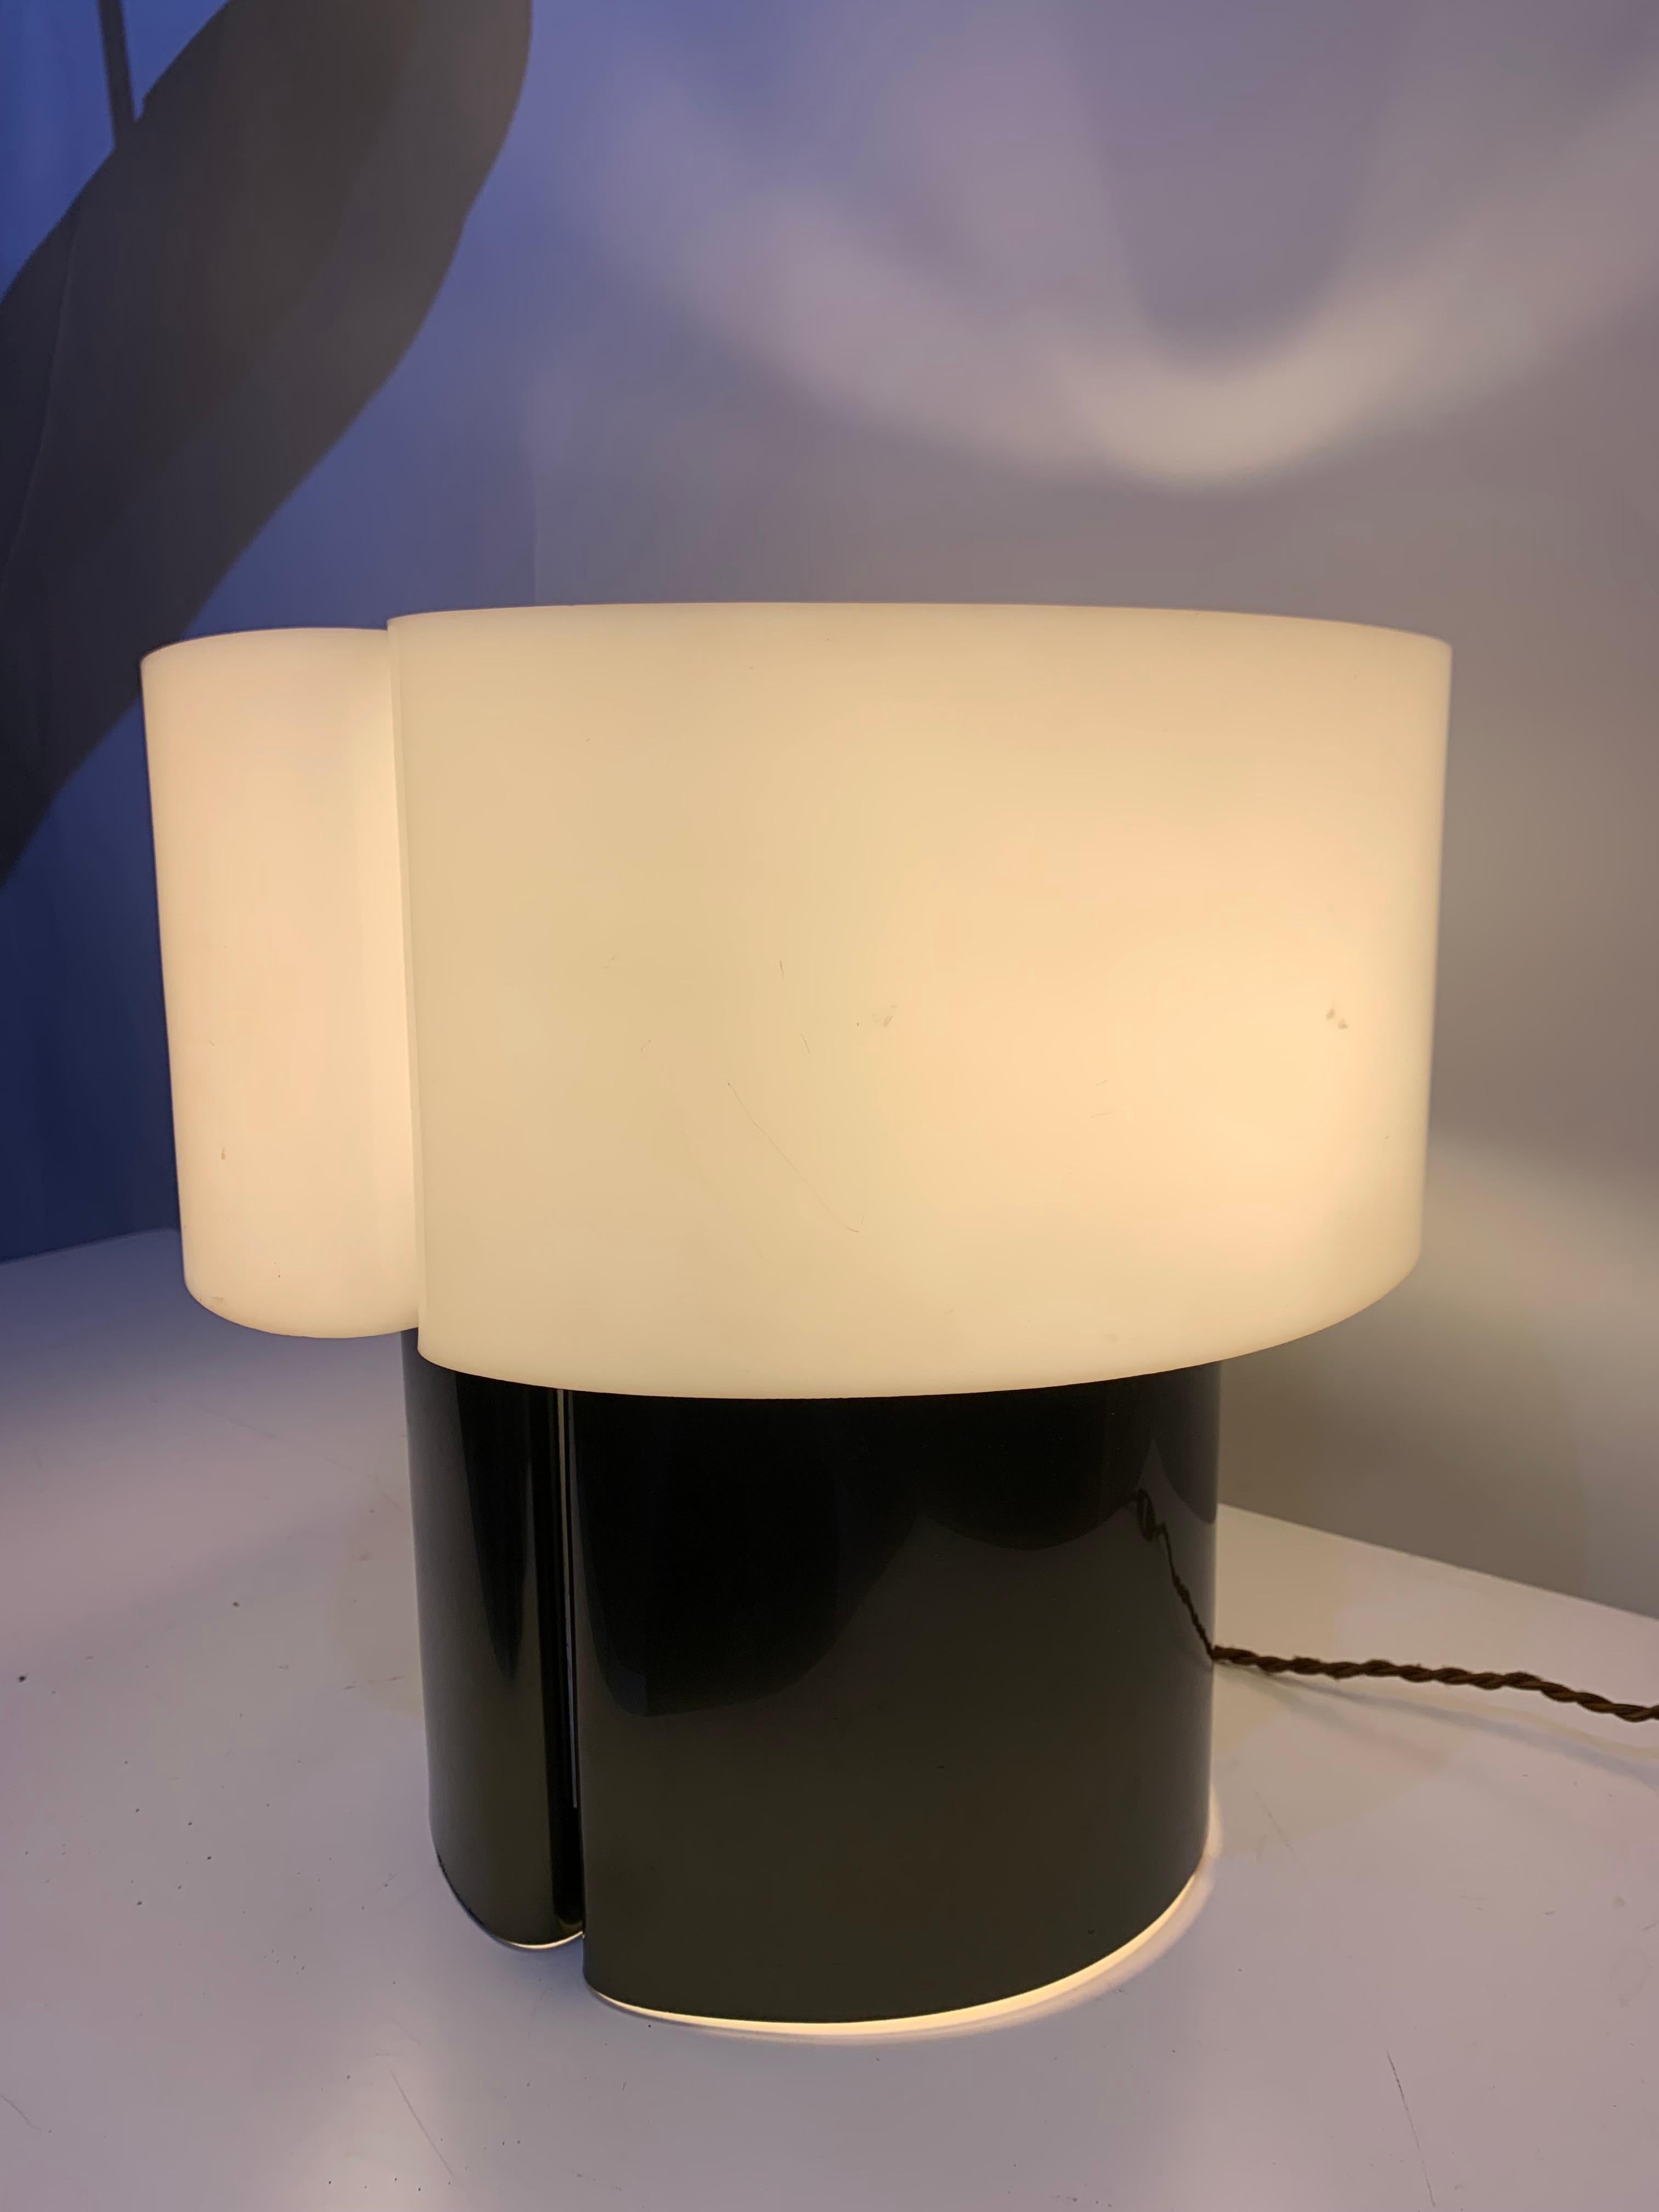 French Rare table lamp “Cyclade” signed by Danielle Quarante